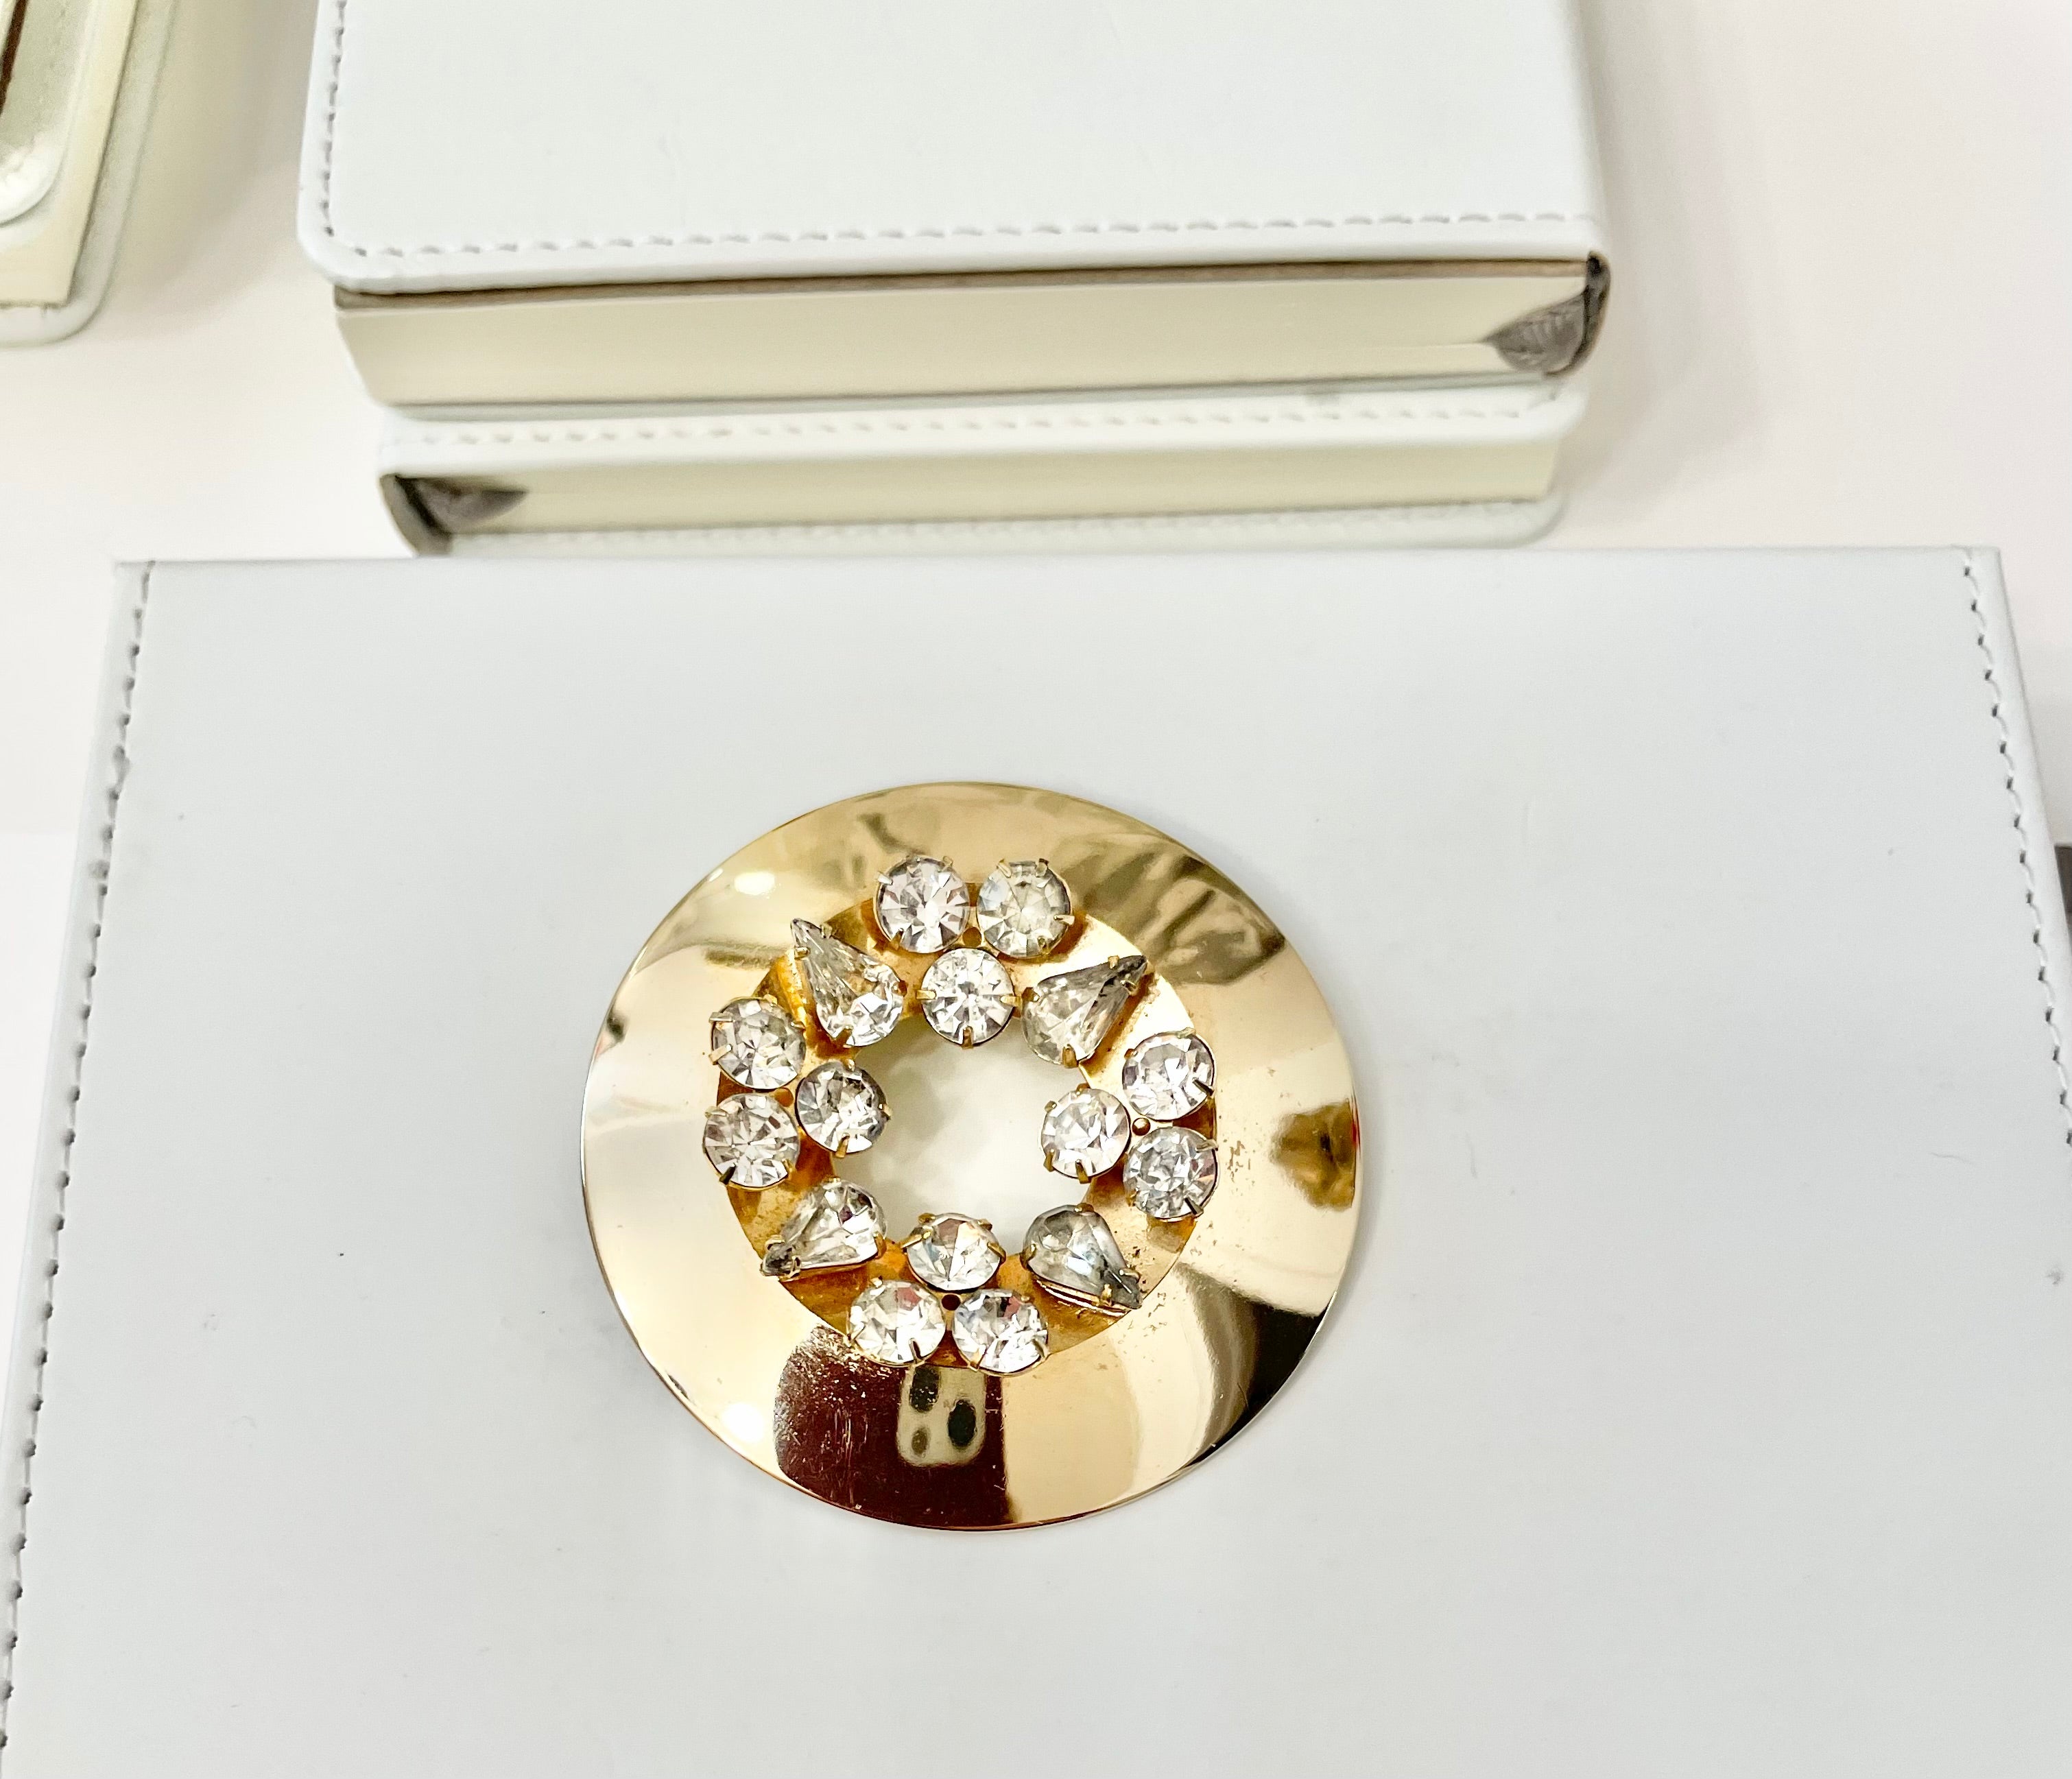 1960's Heiress stunning gold circle brooch, adorned with clear glass... so pretty